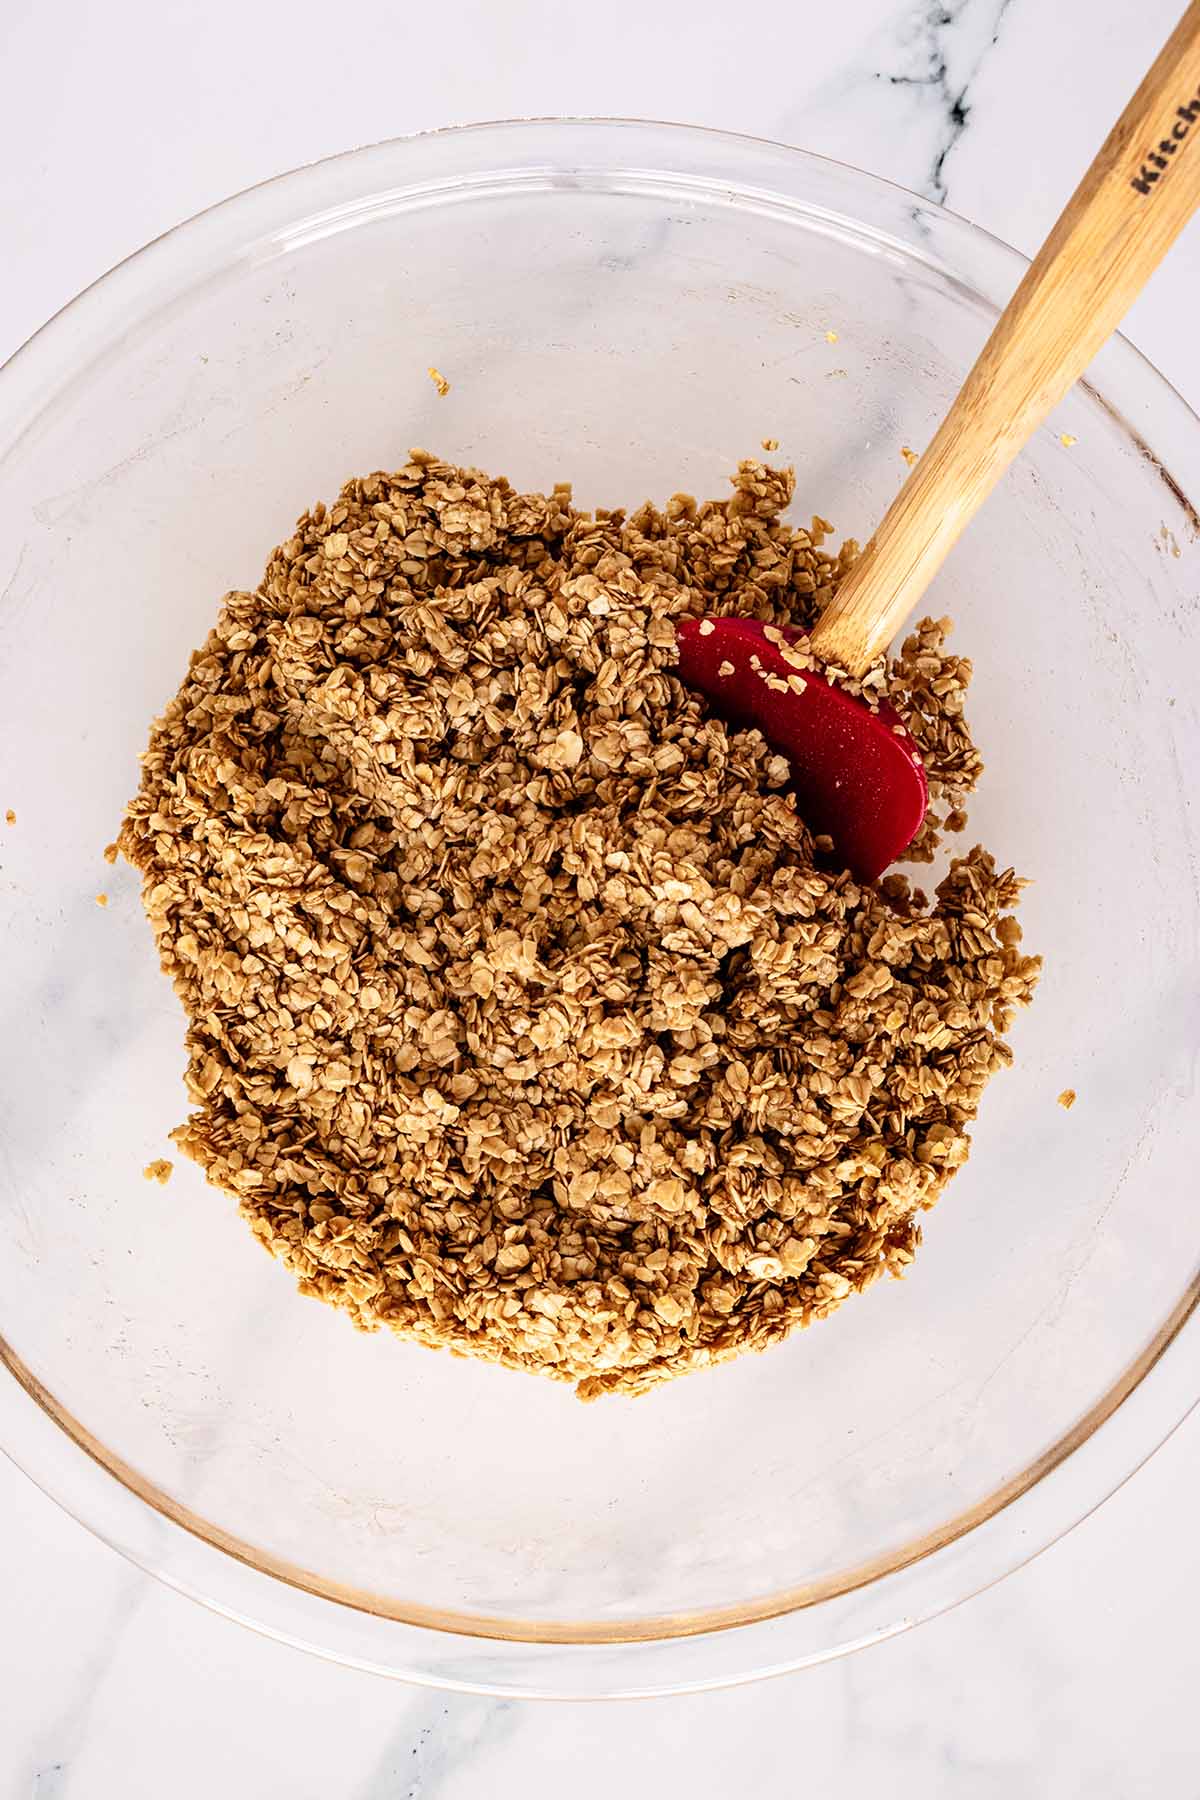 Overhead view of oat mixture in a glass bowl with a red spatula